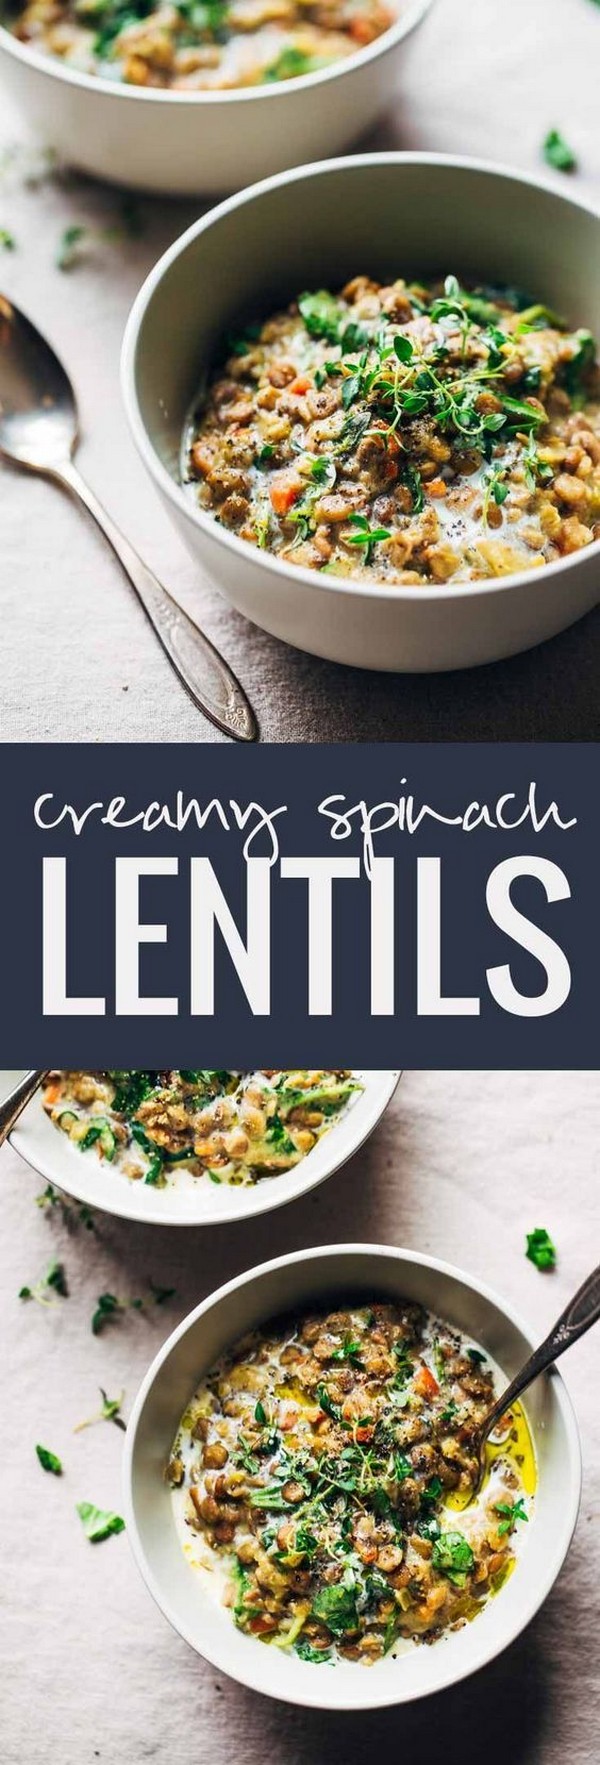 One-Pot Creamy Spinach Lentils